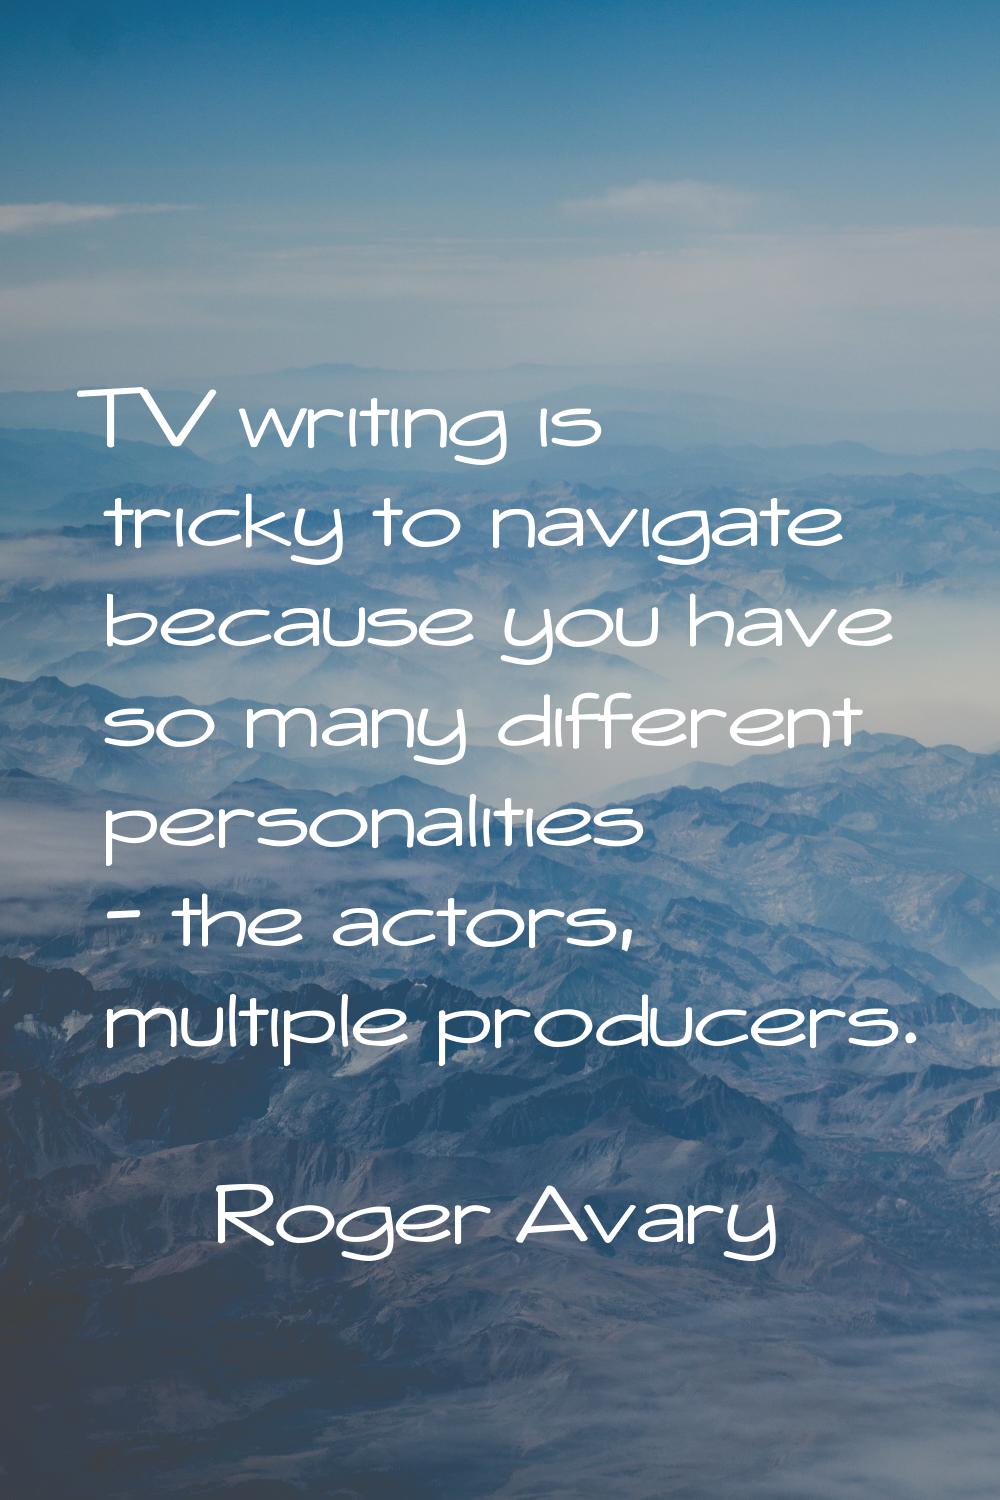 TV writing is tricky to navigate because you have so many different personalities - the actors, mul